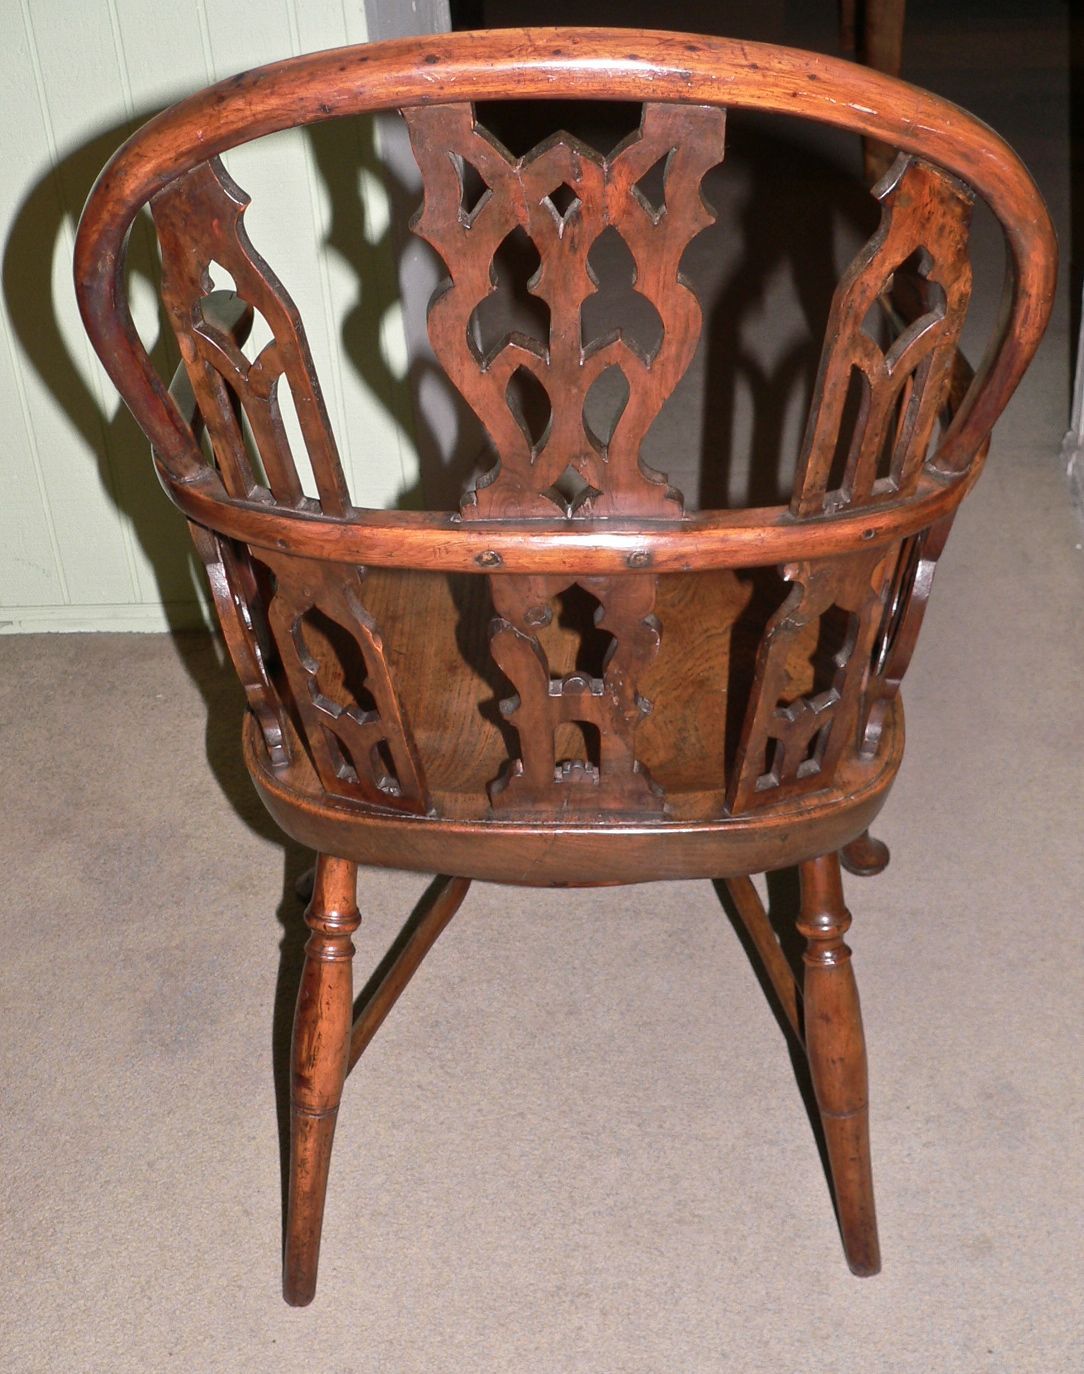 Made in the Thames Valley and dating from 1740-1780, this fabulous quality double hoop Gothic Windsor chair is made of very pretty yew wood with an elm seat. It has cabriole legs, Gothic splats and a crinoline stretcher. According to our reference